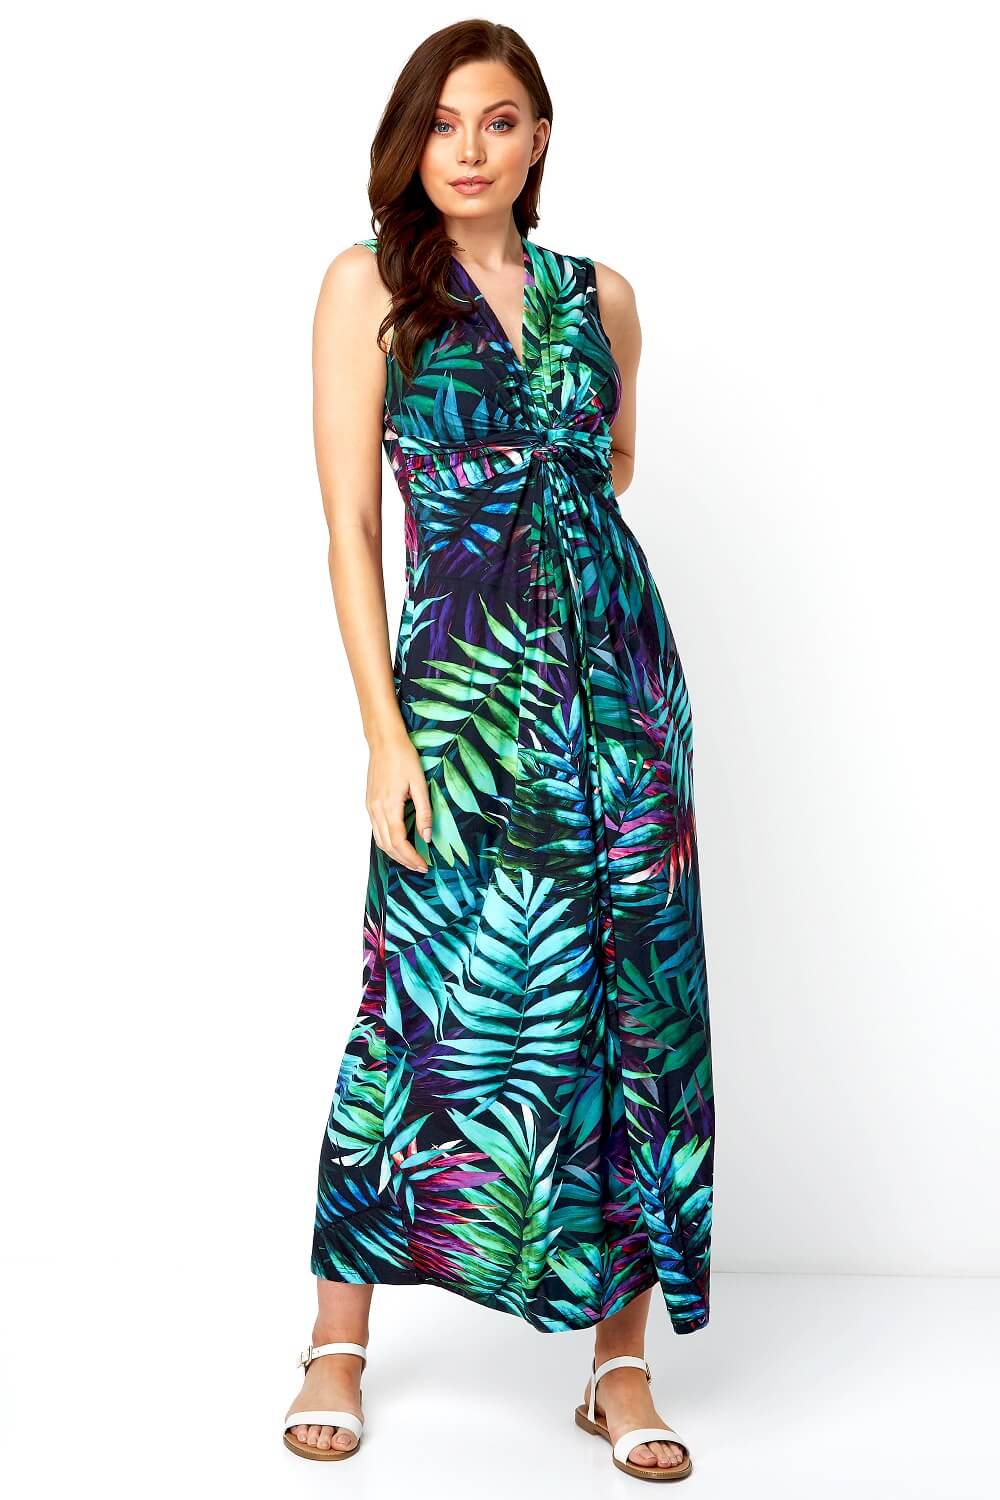 Tropical Print Maxi Dress in Turquoise ...